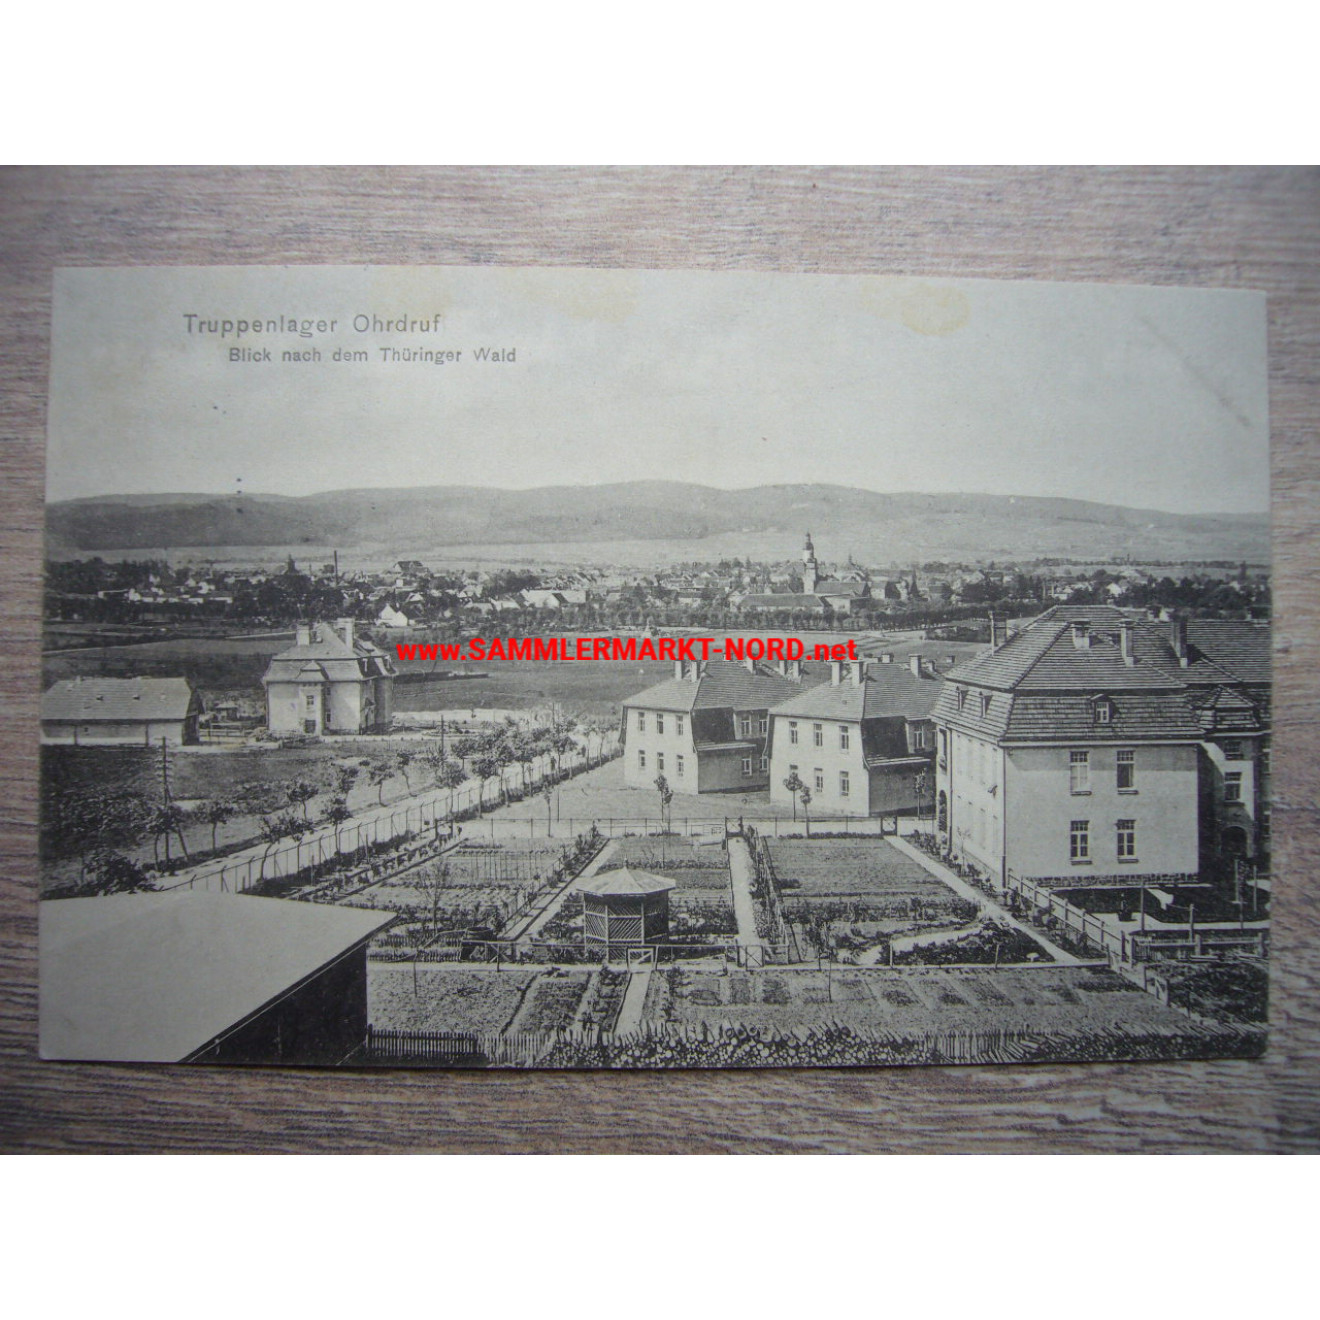 Ohrdruf military camp - view of the barracks - 1915